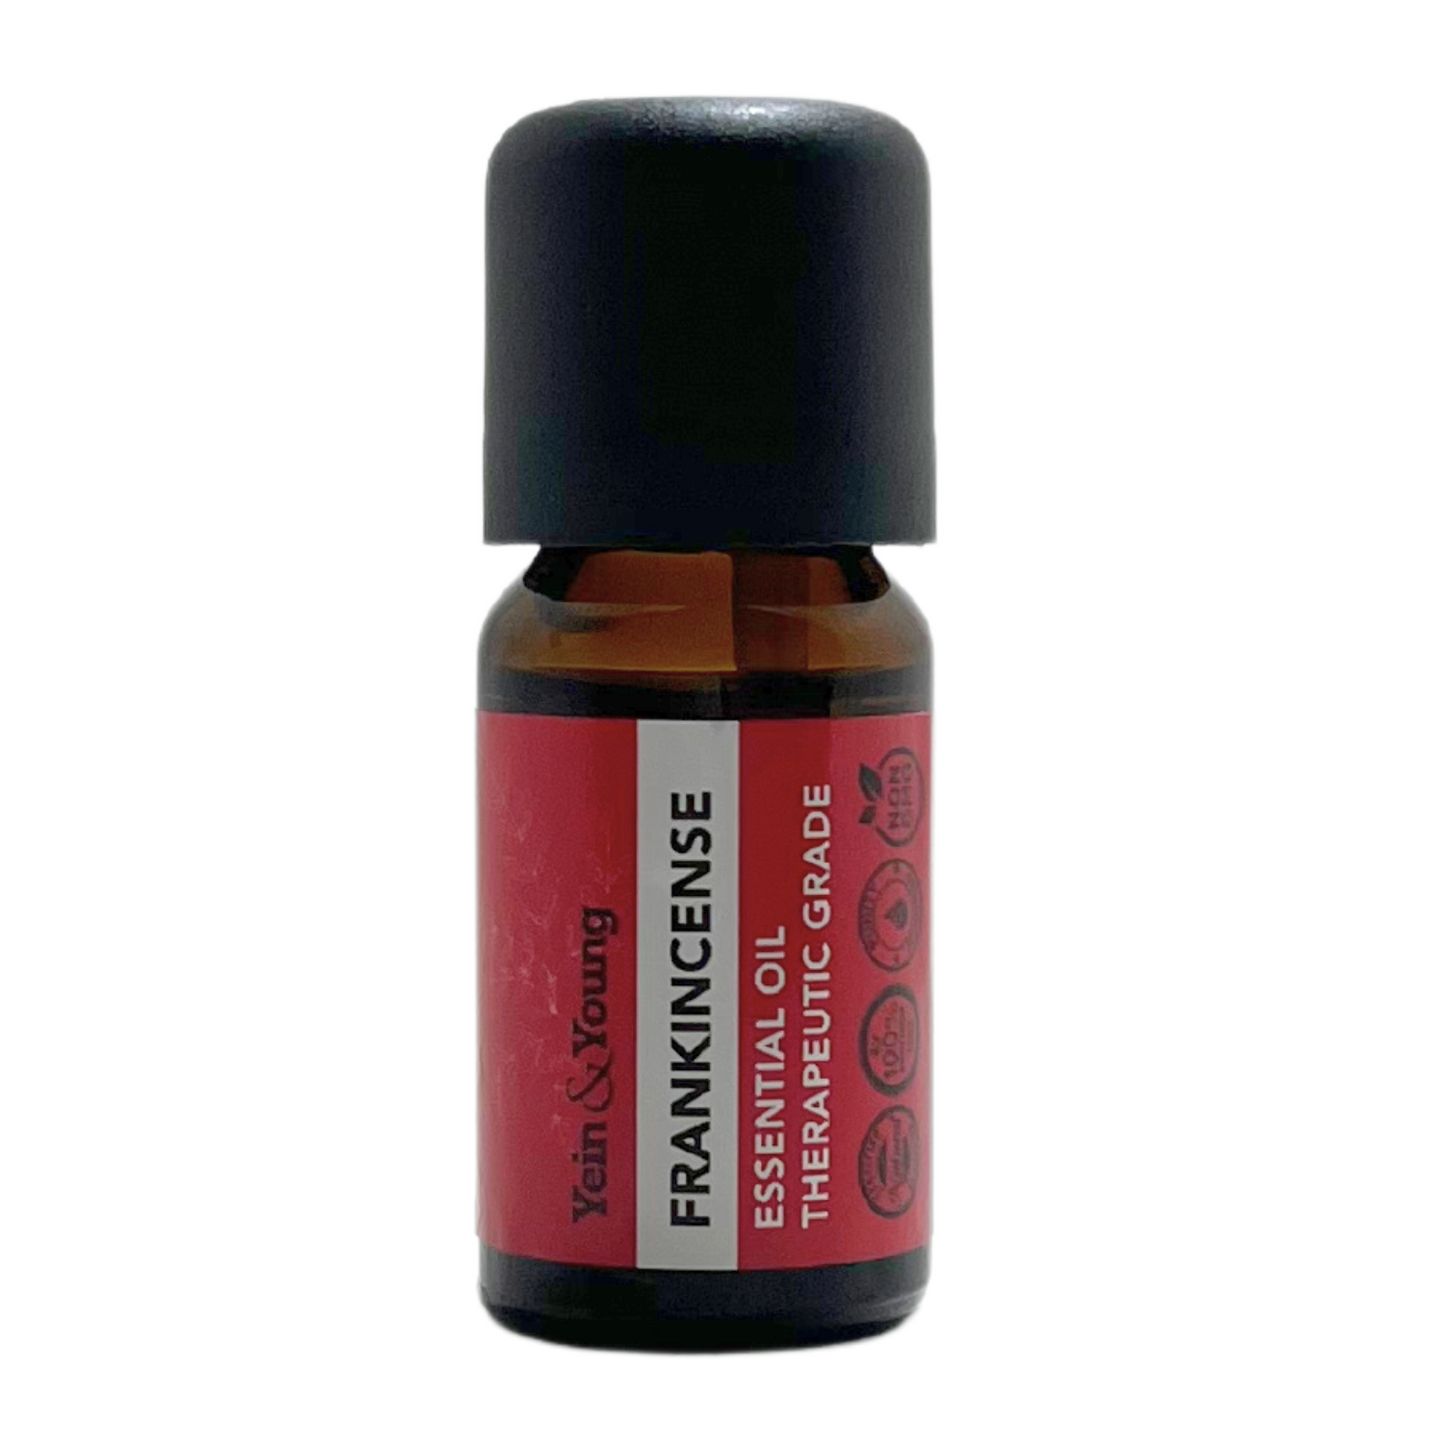 Yein&Young Frankincense Essential Oil - 10ml - Buy 4 pay for 2 ( terms apply )